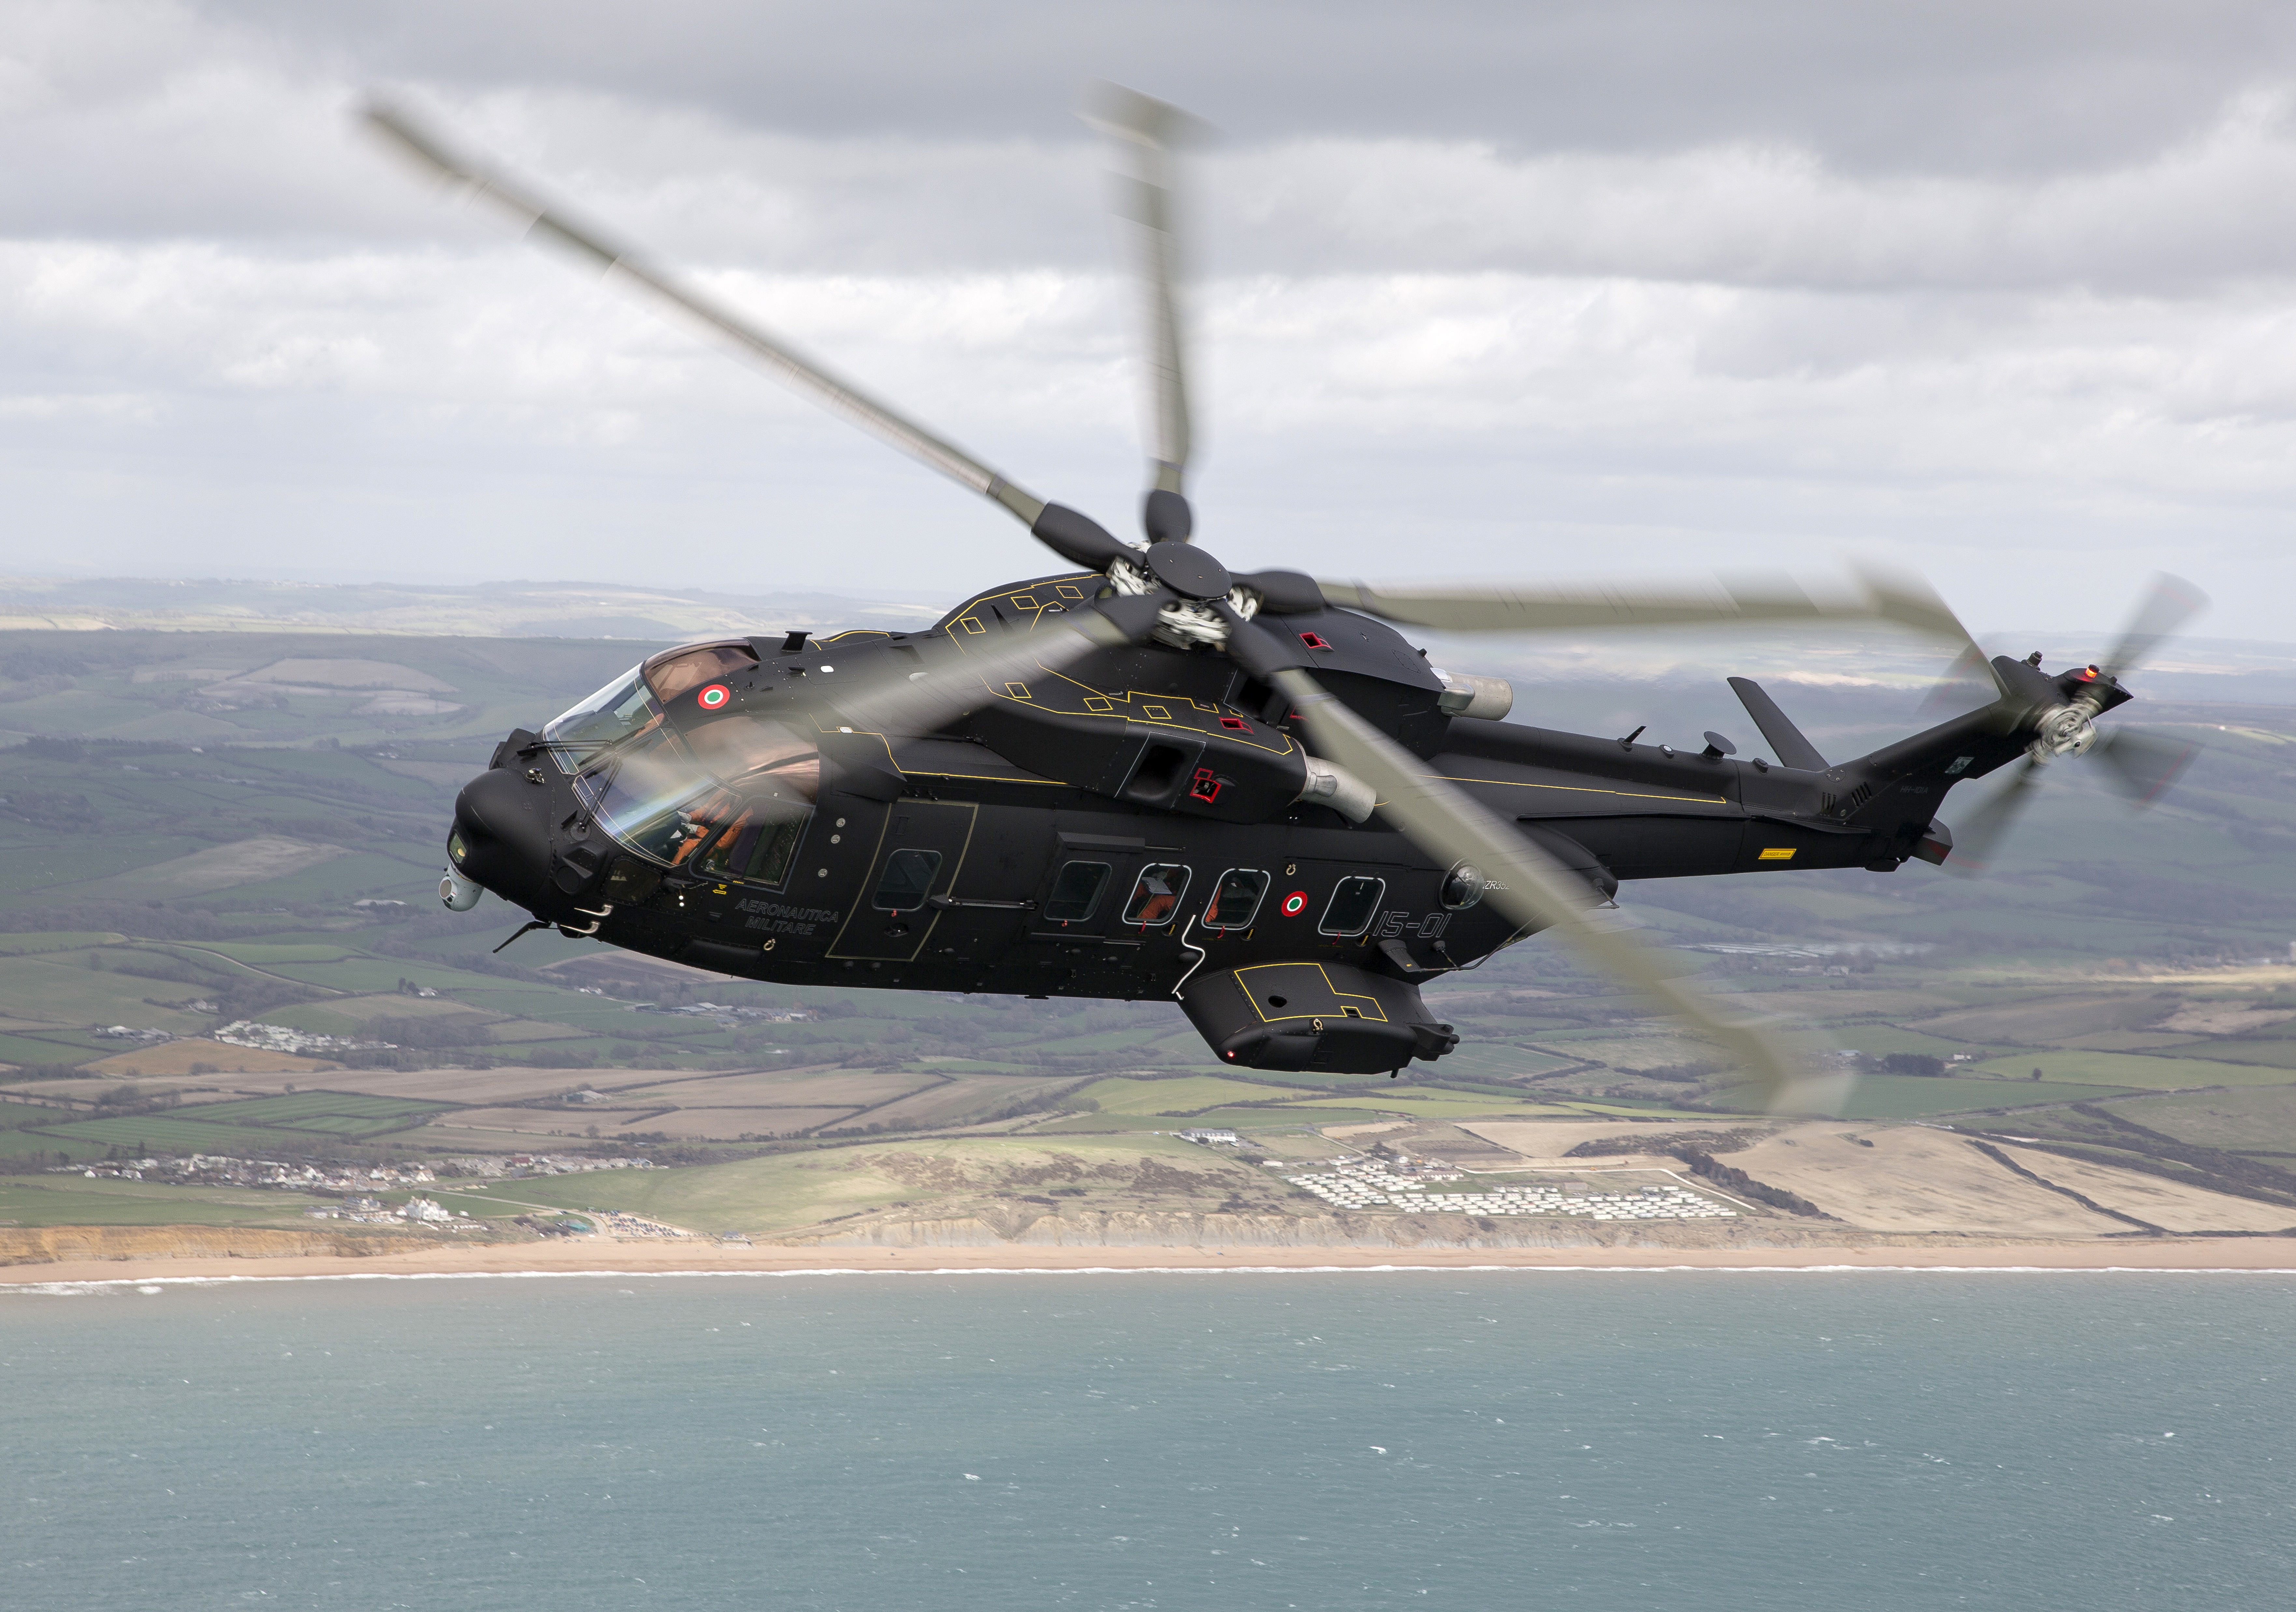 Military AgustaWestland AW101 HD Wallpaper | Background Image